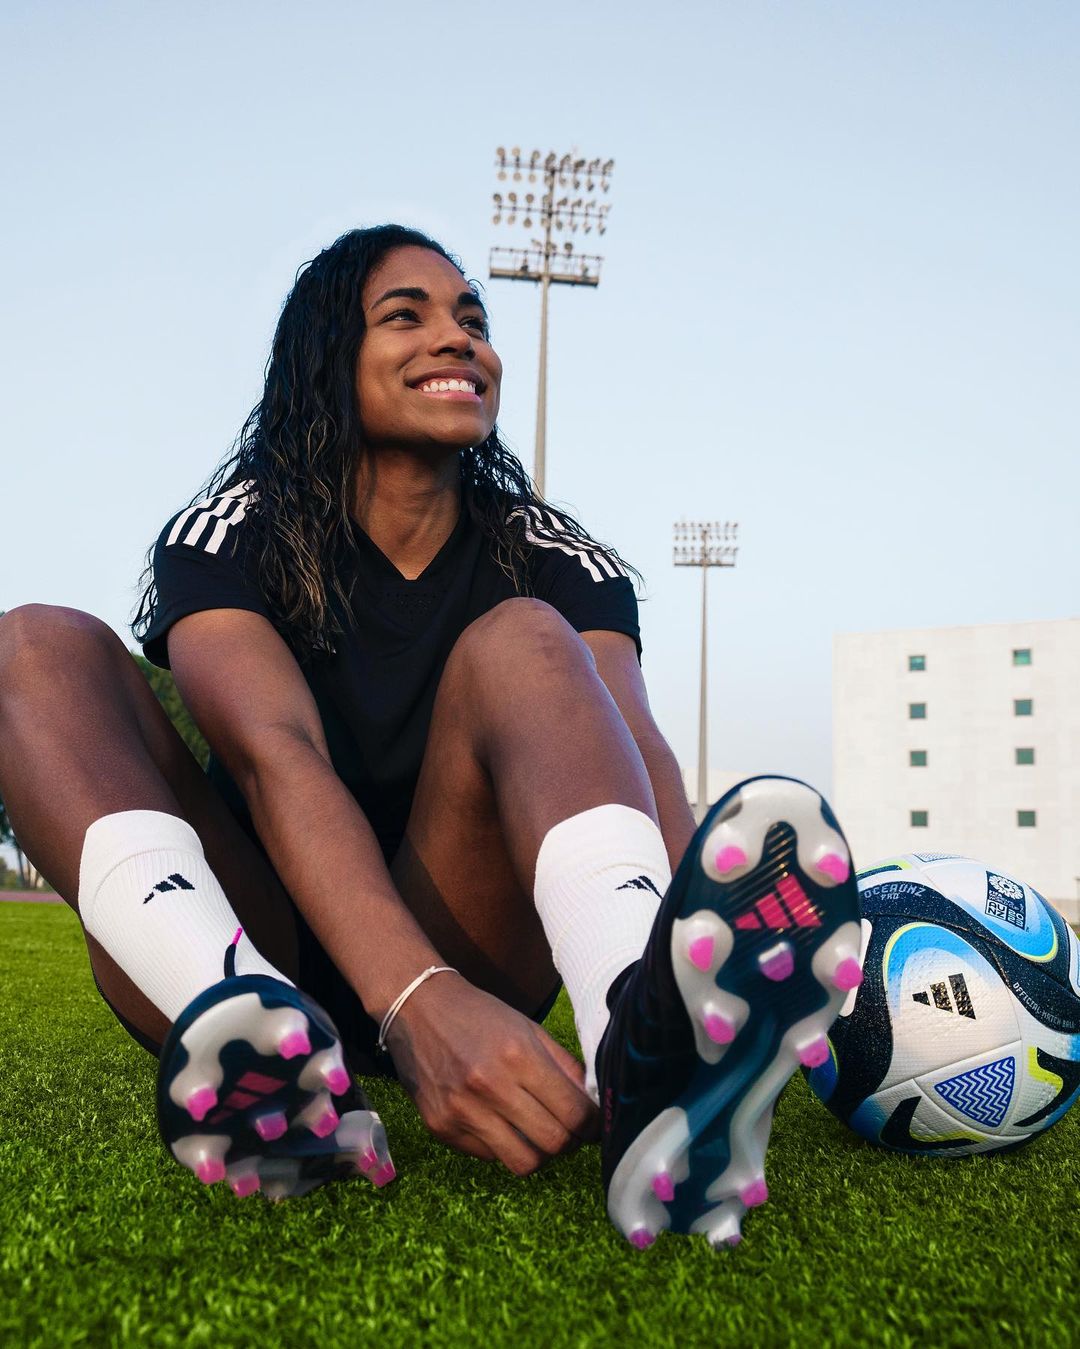 Catarina Macario is one of the United States' best female footballers